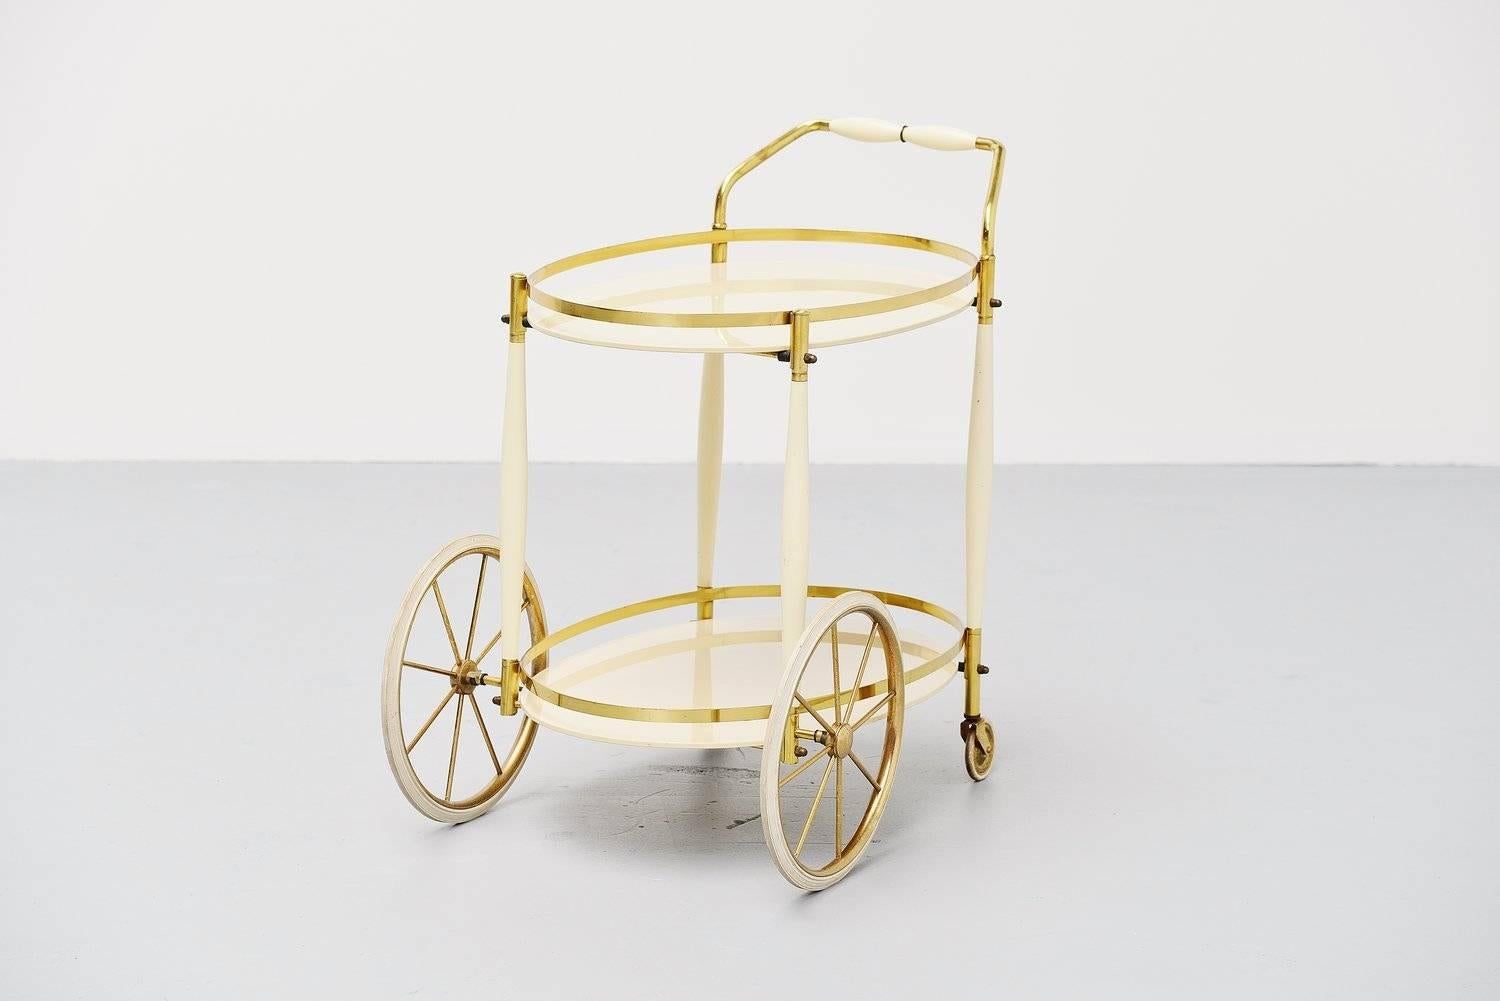 Decorative tea cart made by unknown manufacturer or designer but Italian for sure. Manufacturer circa 1950. This cart is made of brass and has white opaline glass trays, and a white lacquered wooden handle. The wheels are made of rubber and ride